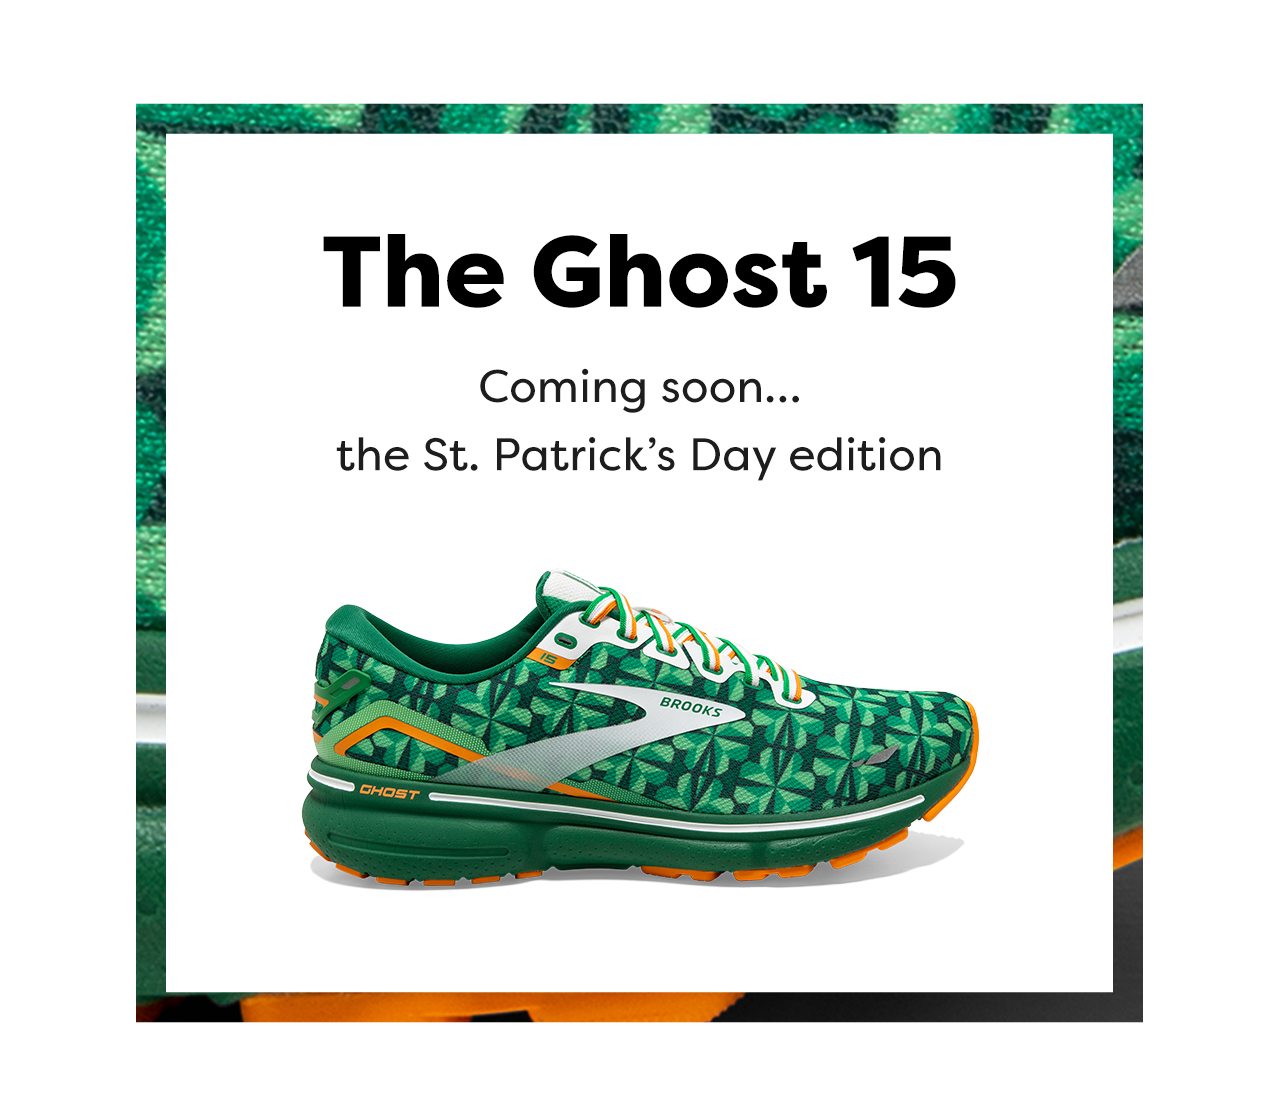 The Ghost 15 - Comming soon... the St. Patrick's Day edition